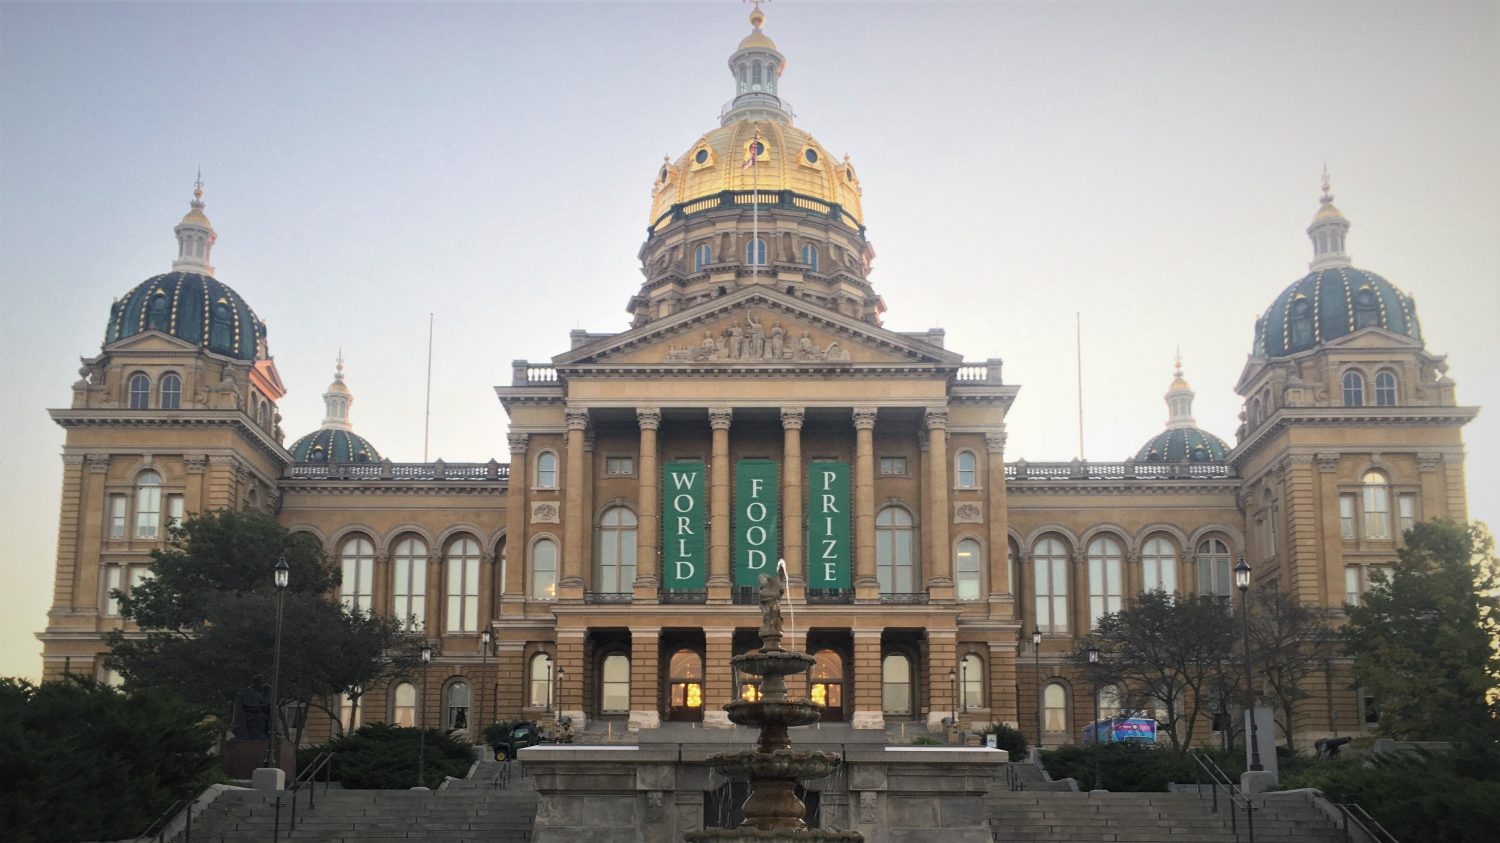 Iowa State Capitol building with World Food Prize banners in Des Moines, Iowa